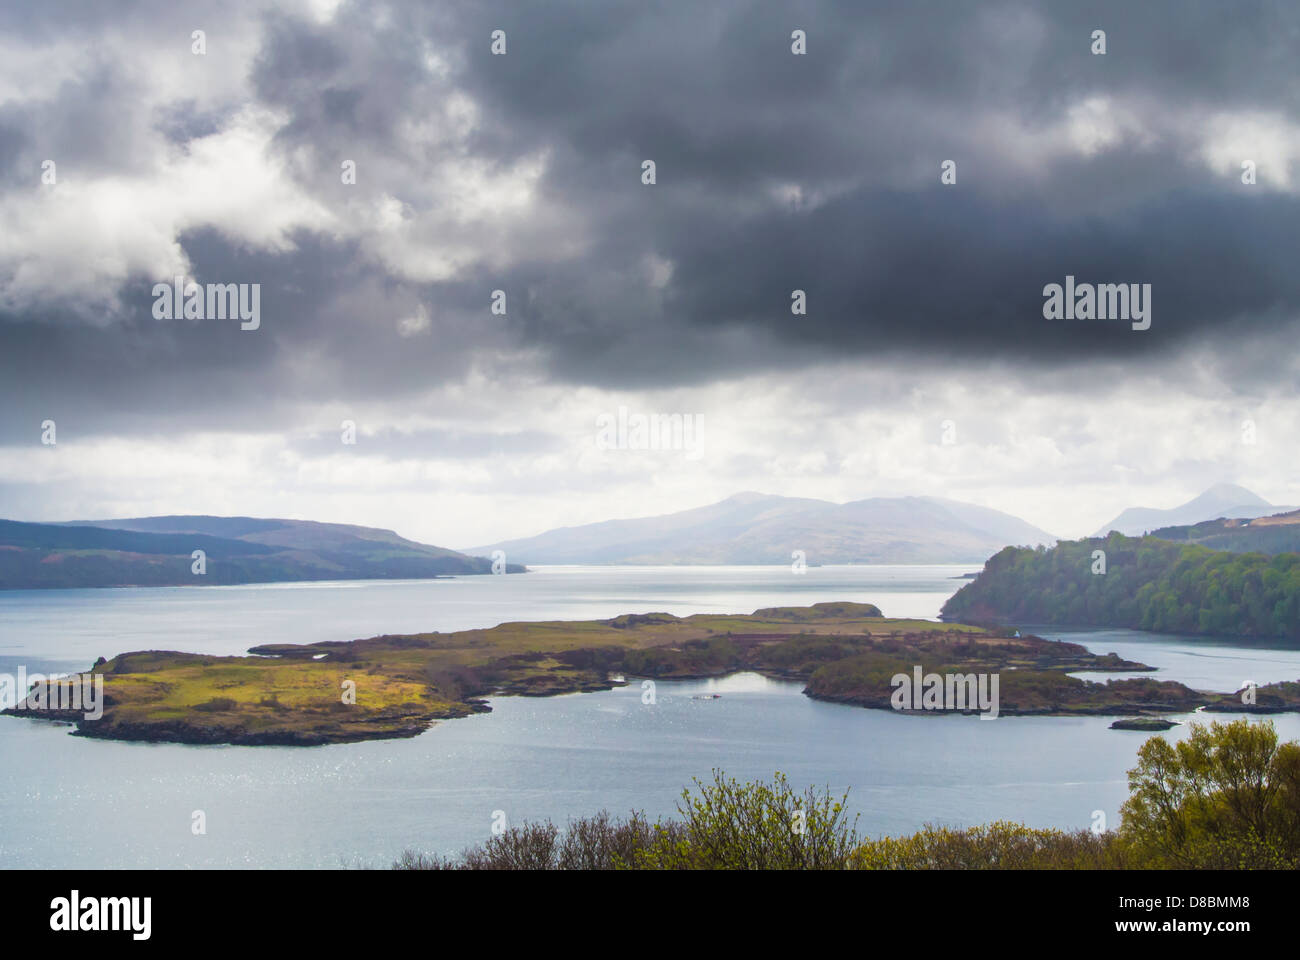 View from the Isle of Mull looking south east to Calve island on the sound of mull, Scotland Stock Photo